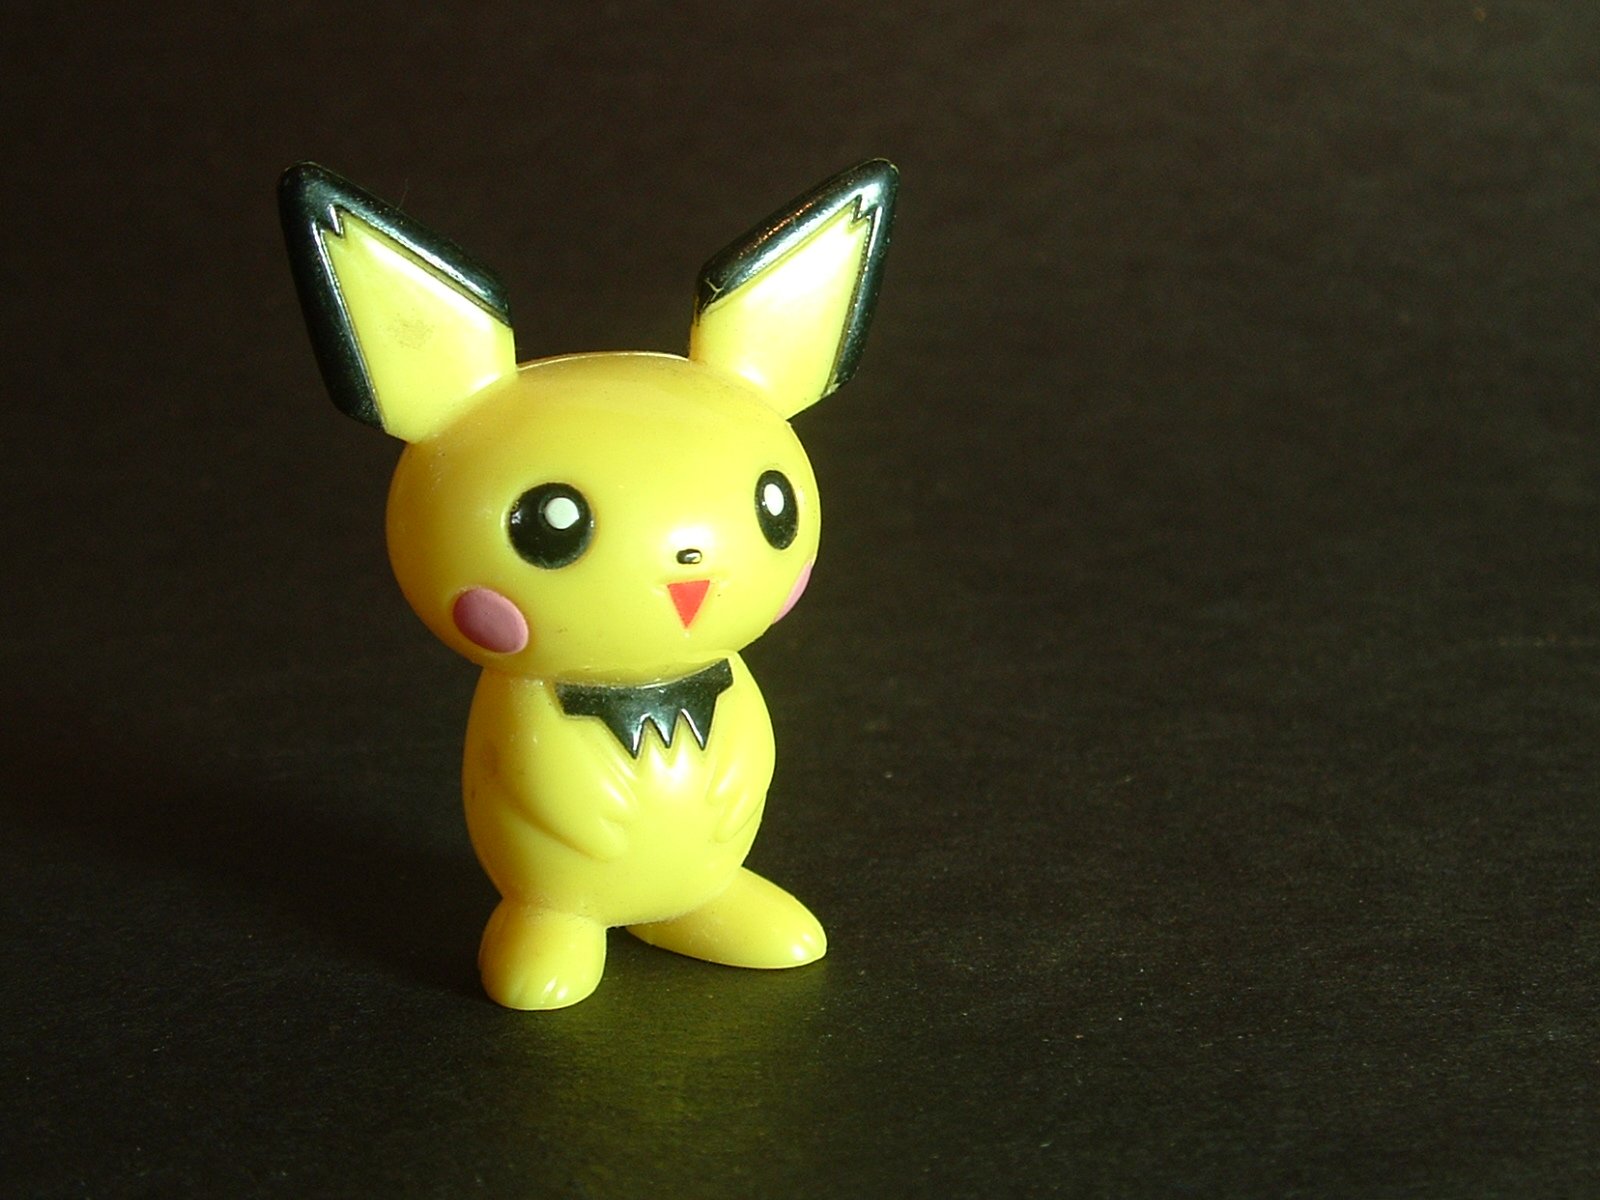 small plastic pikachu with ears standing on black surface